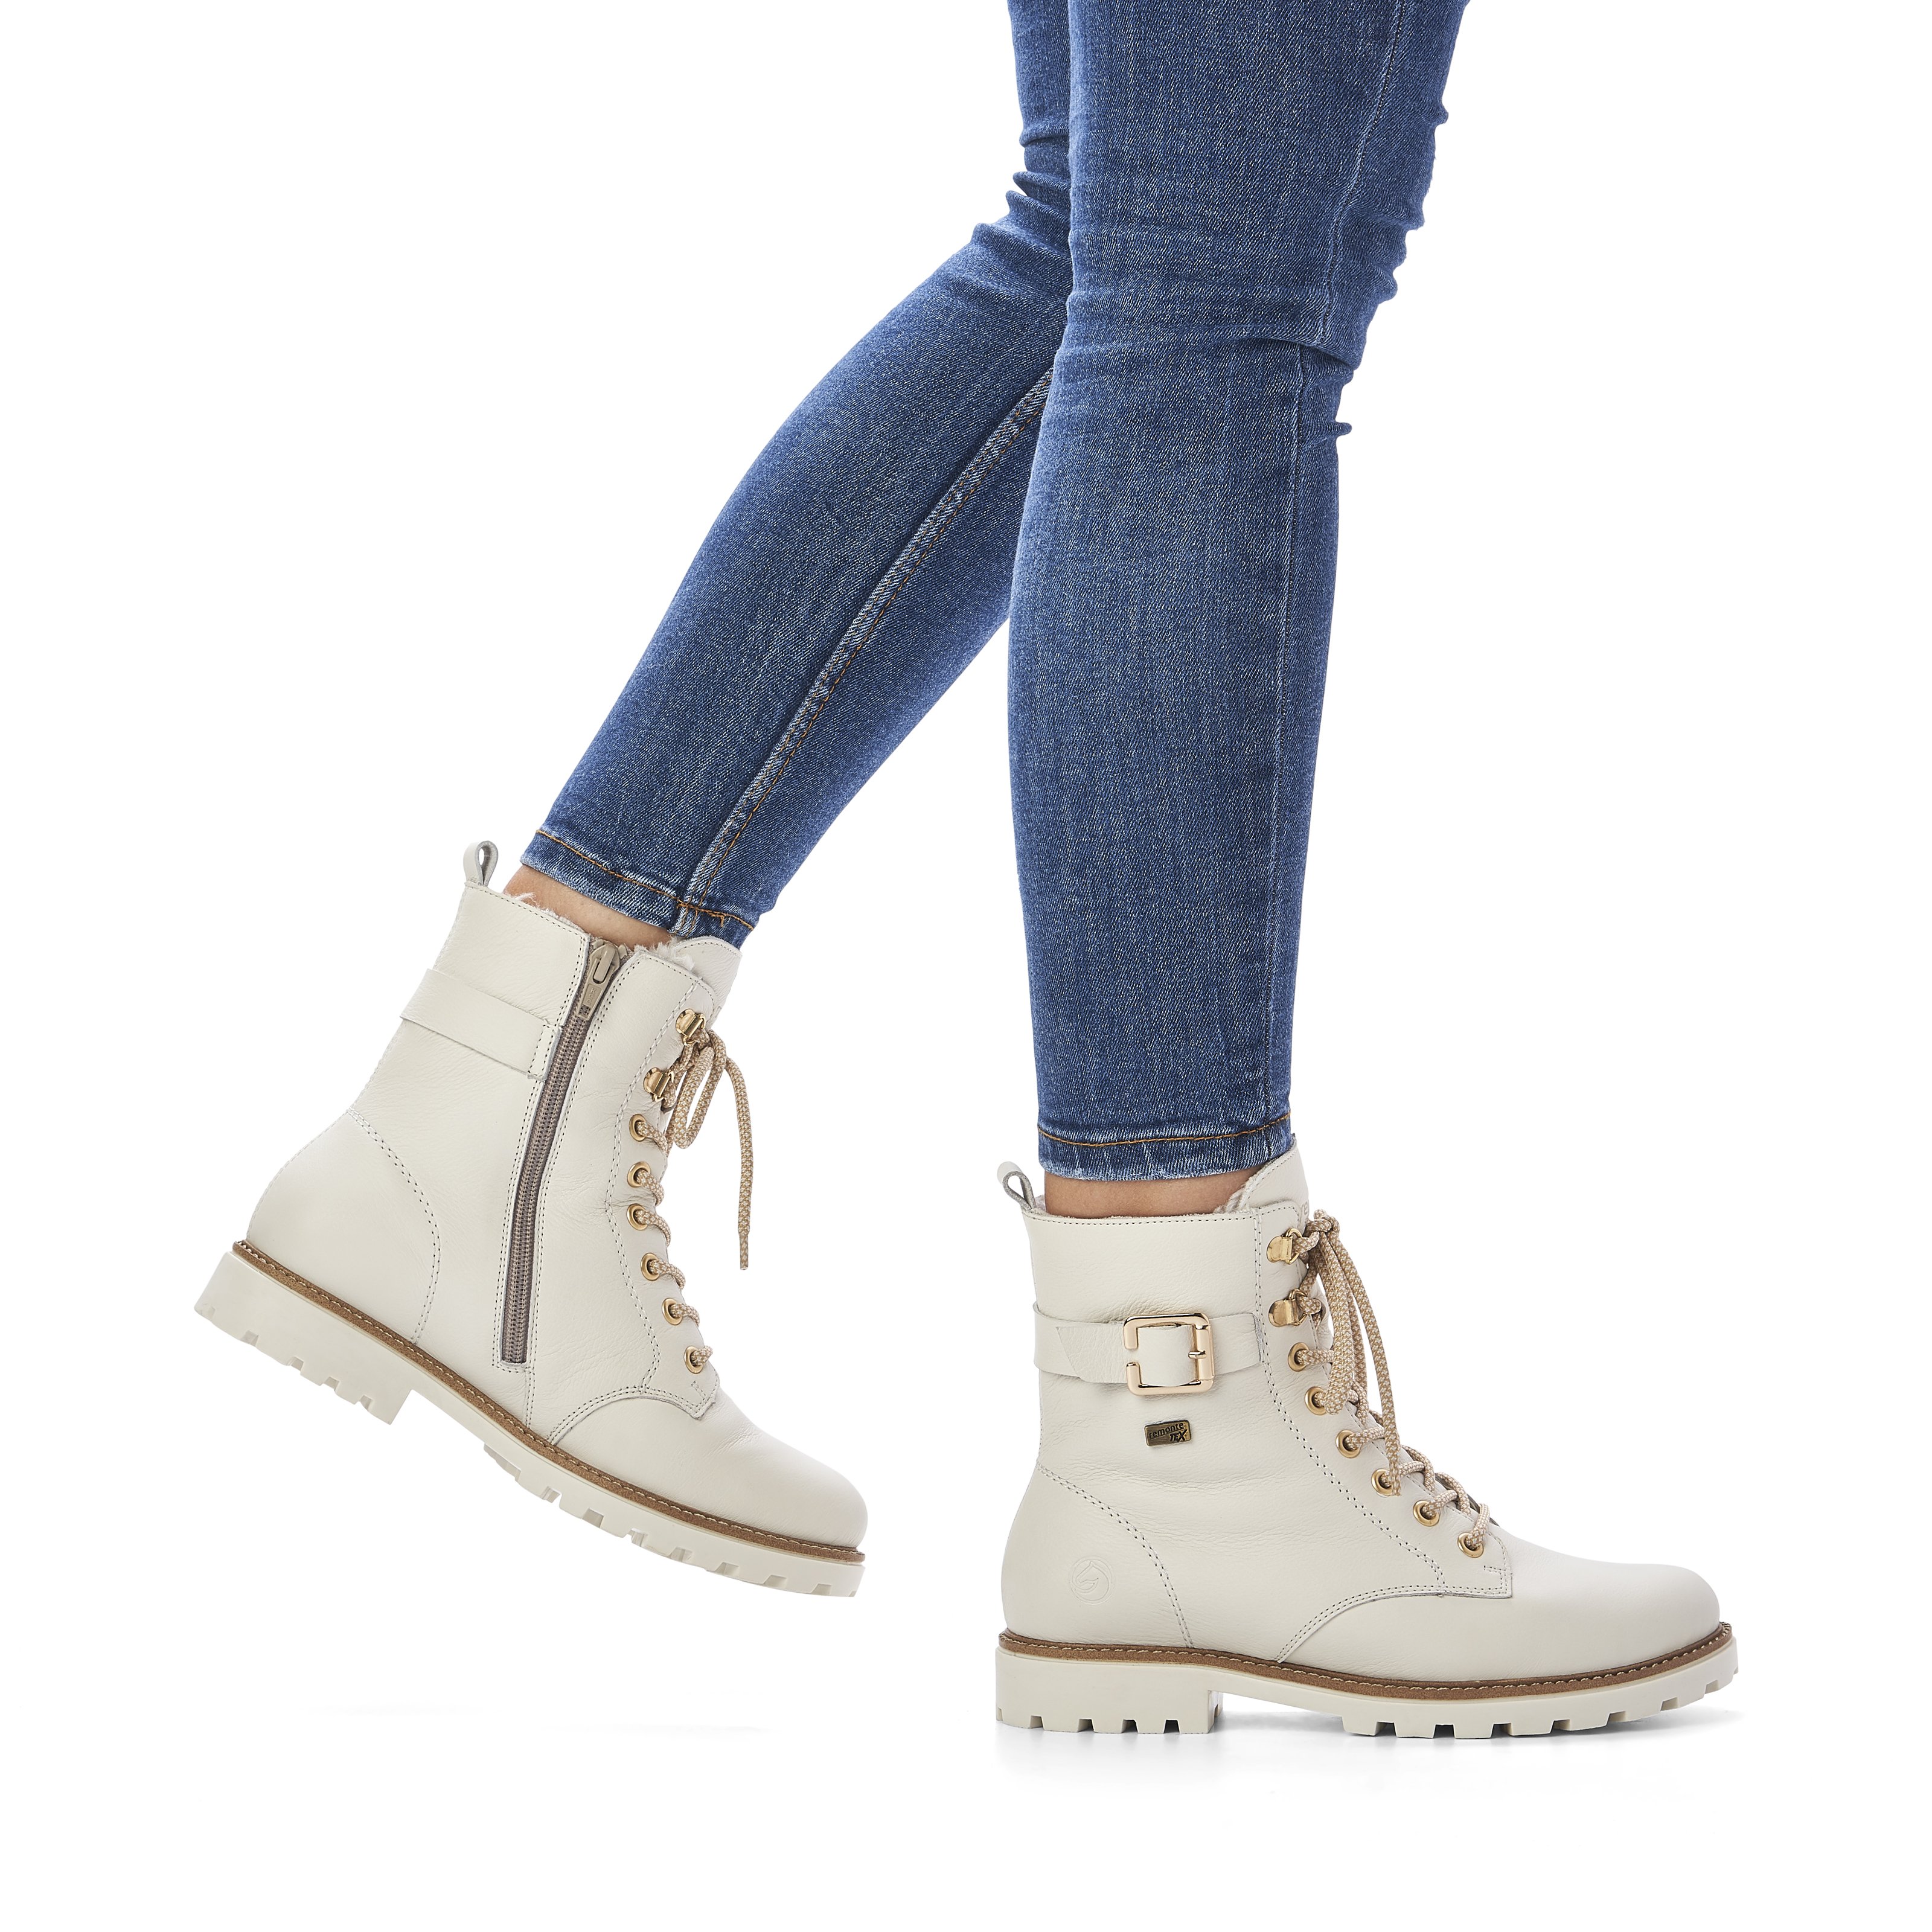 Off-white remonte women´s lace-up boots D8475-80 with flexible profile sole. Shoe on foot